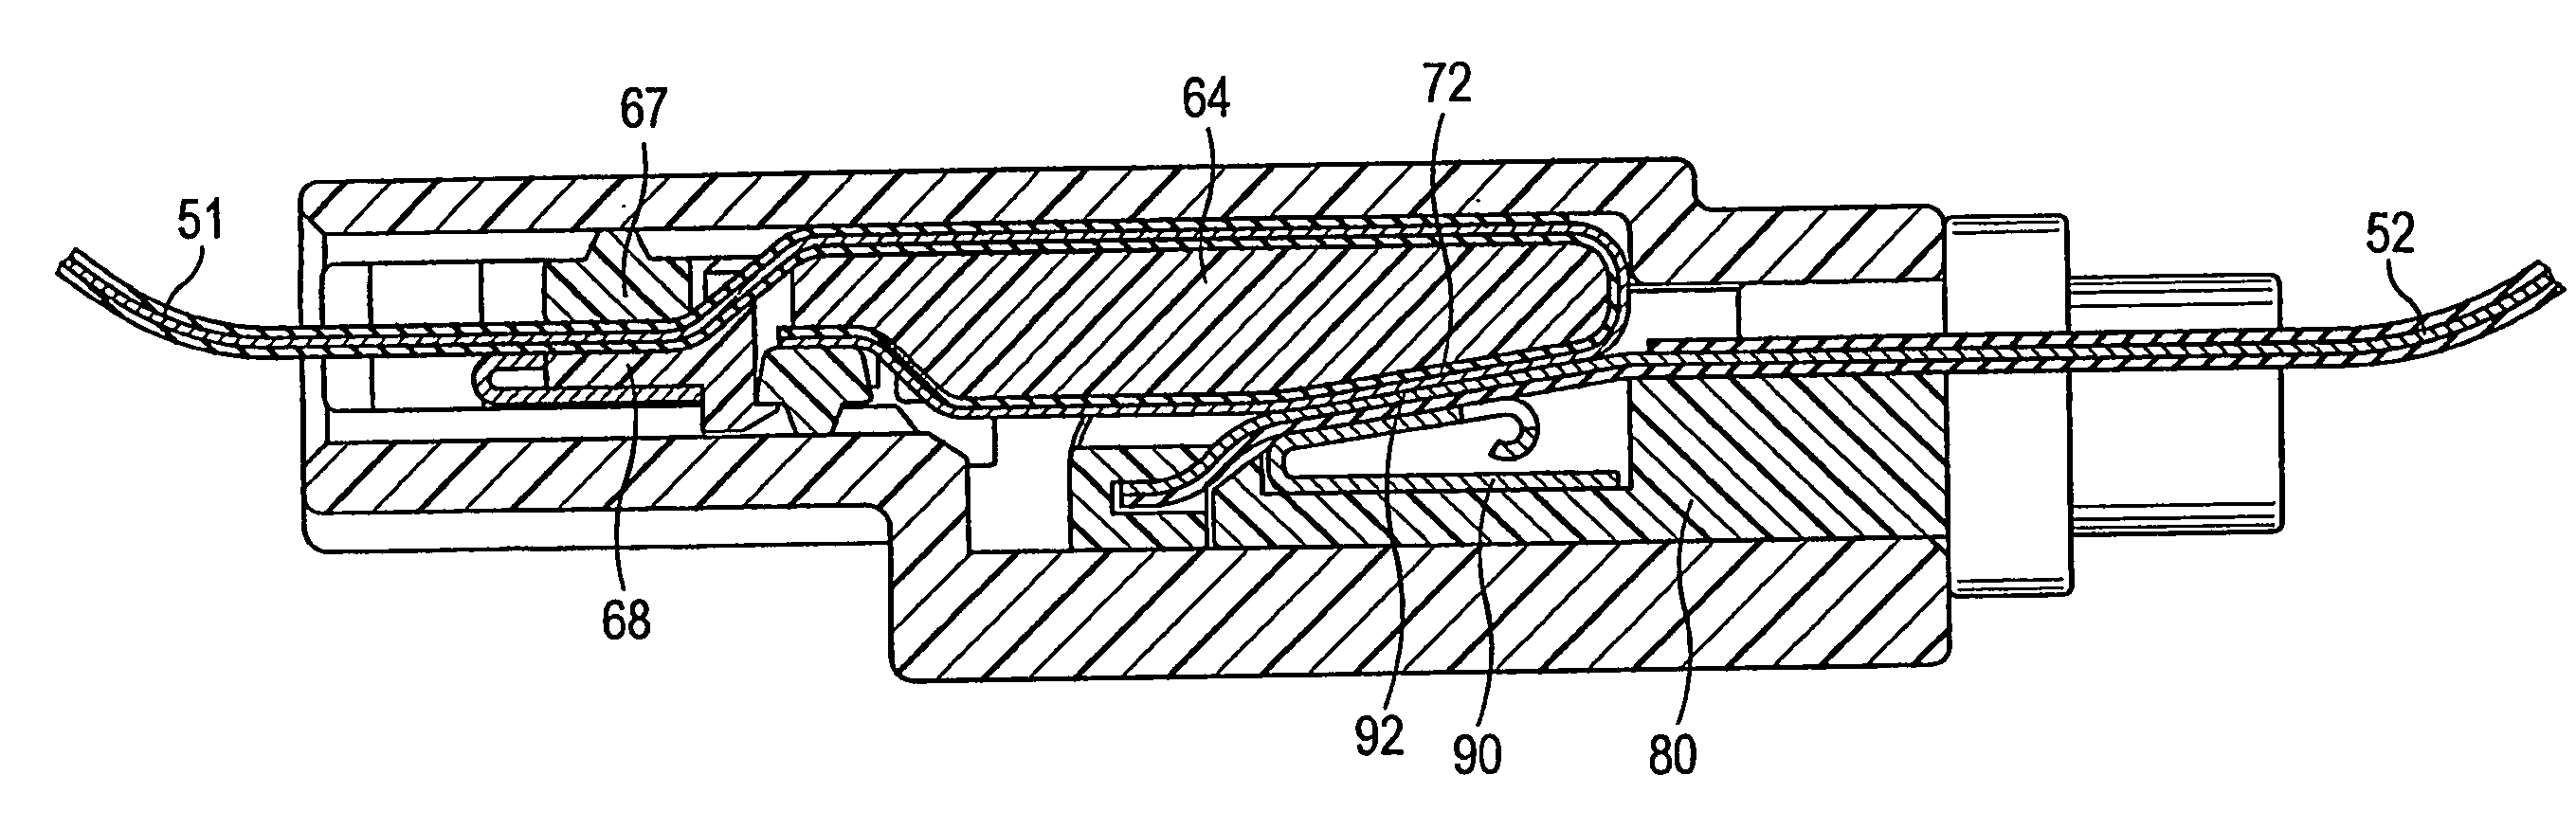 Plug-in connector for connecting two flat strip conductors and associated plug-in connector system